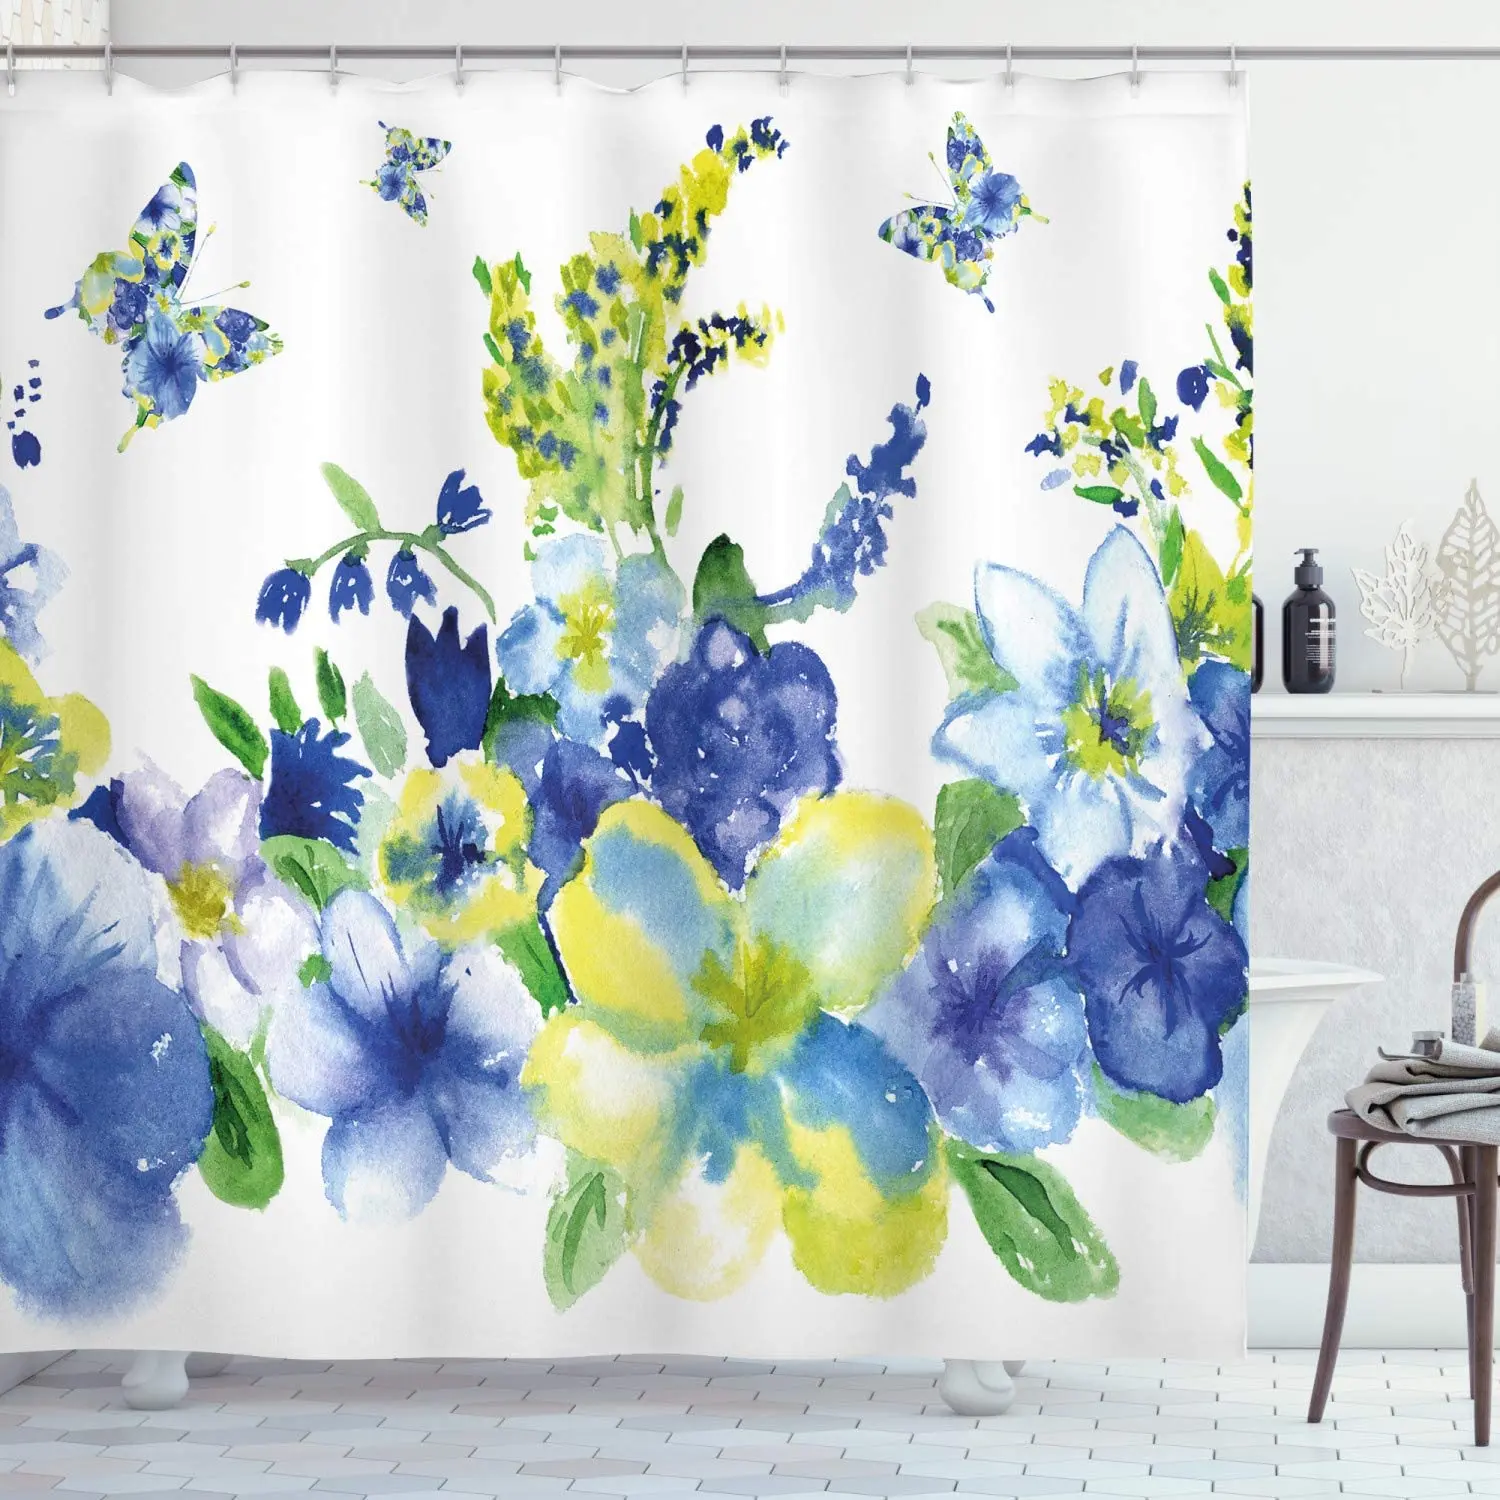 

Yellow and Blue Shower Curtain, Spring Flower Watercolor Flourishing Vibrant Blooms Design, Cloth Fabric Bathroom Deco